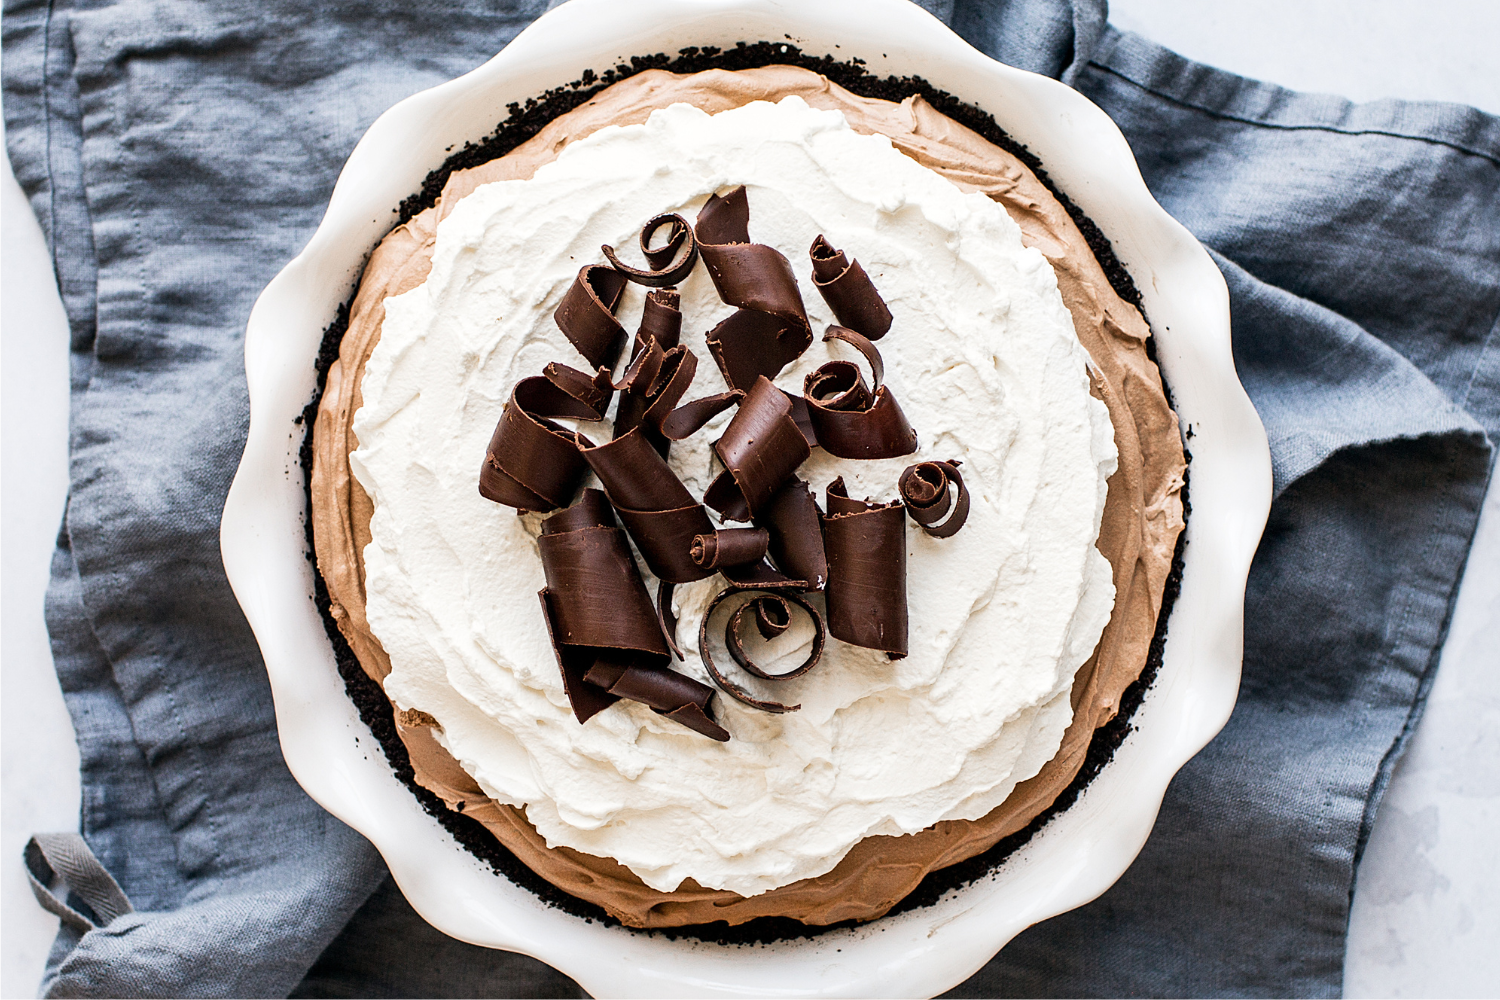 the whole French silk pie with chocolate curls on top.